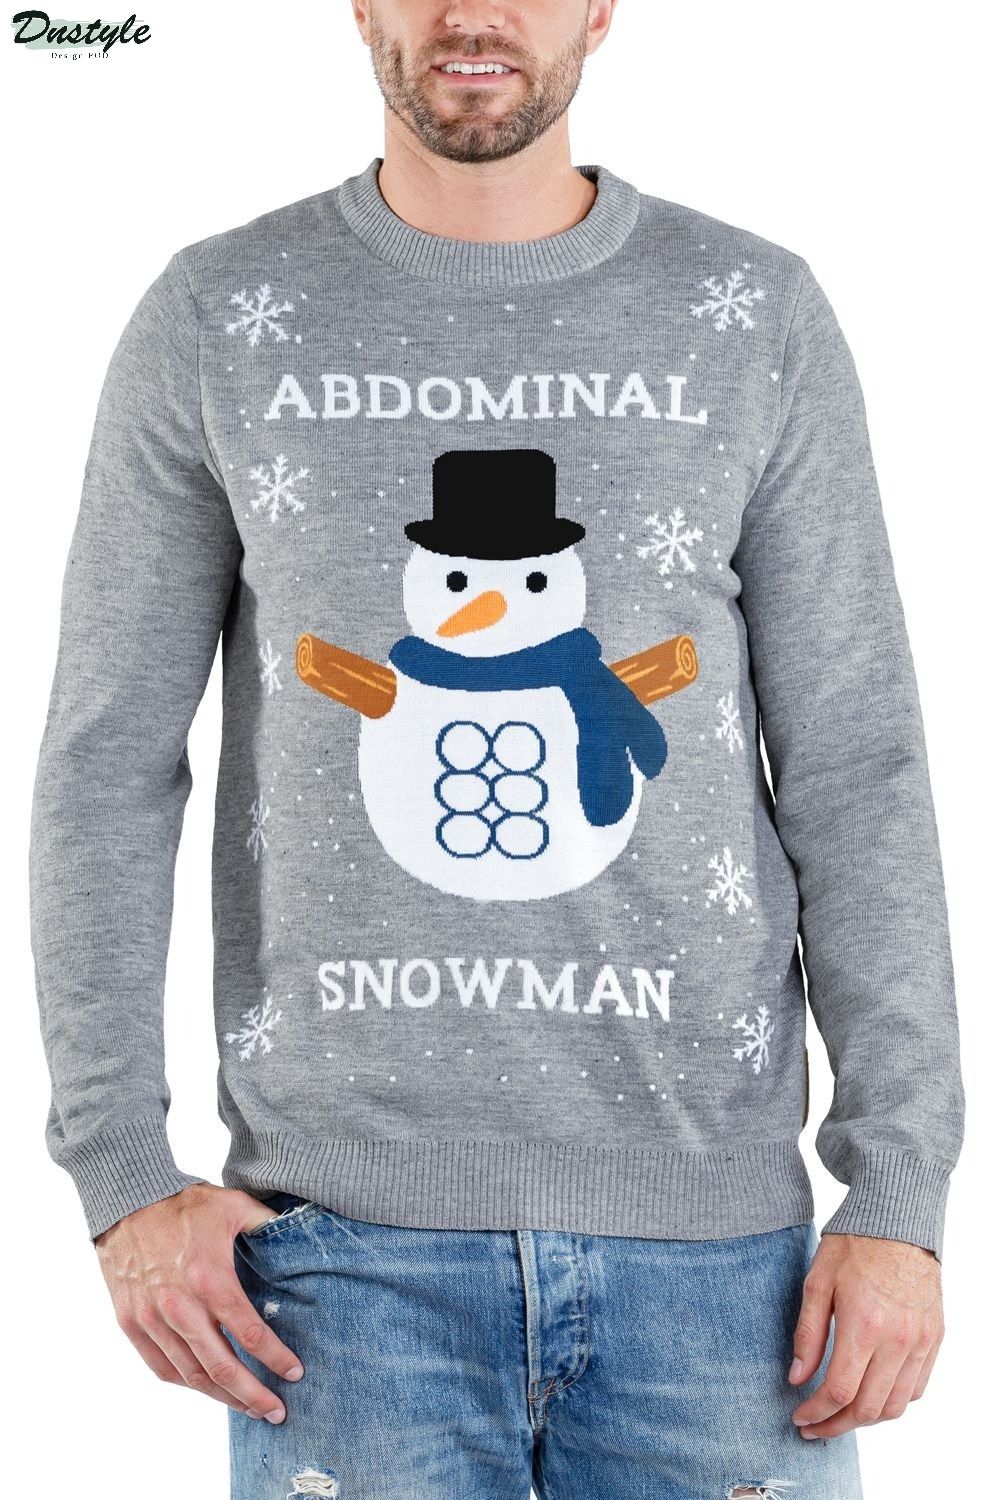 Abdominal Snowman Ugly Christmas Sweater